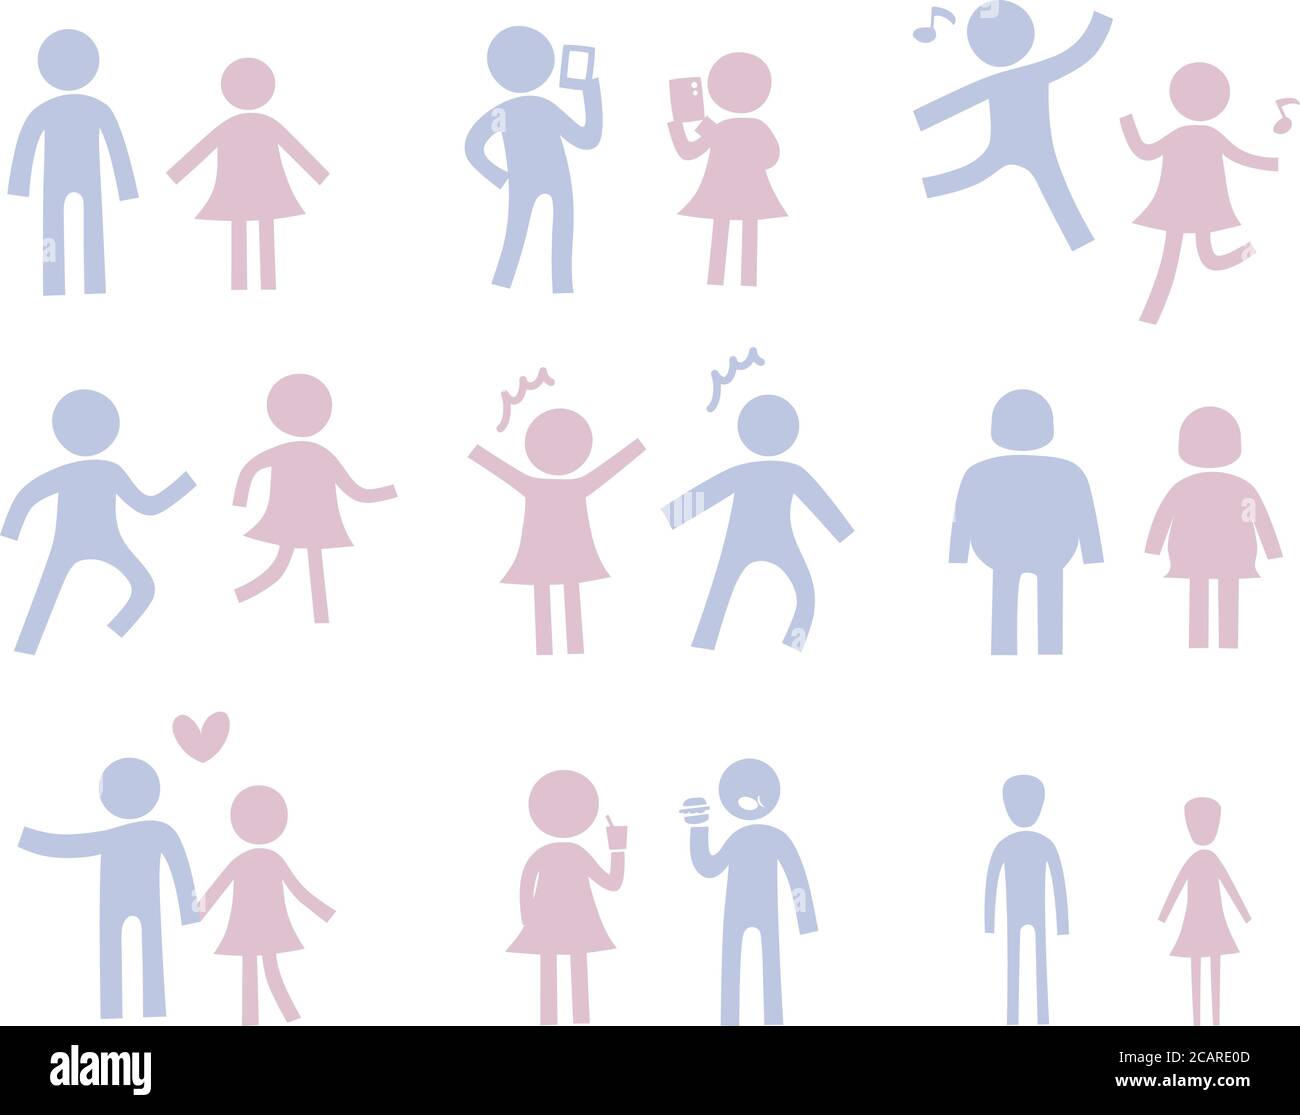 Silhouettes of cheerful playing couples. Vector illustration isolated on white background. Stock Vector